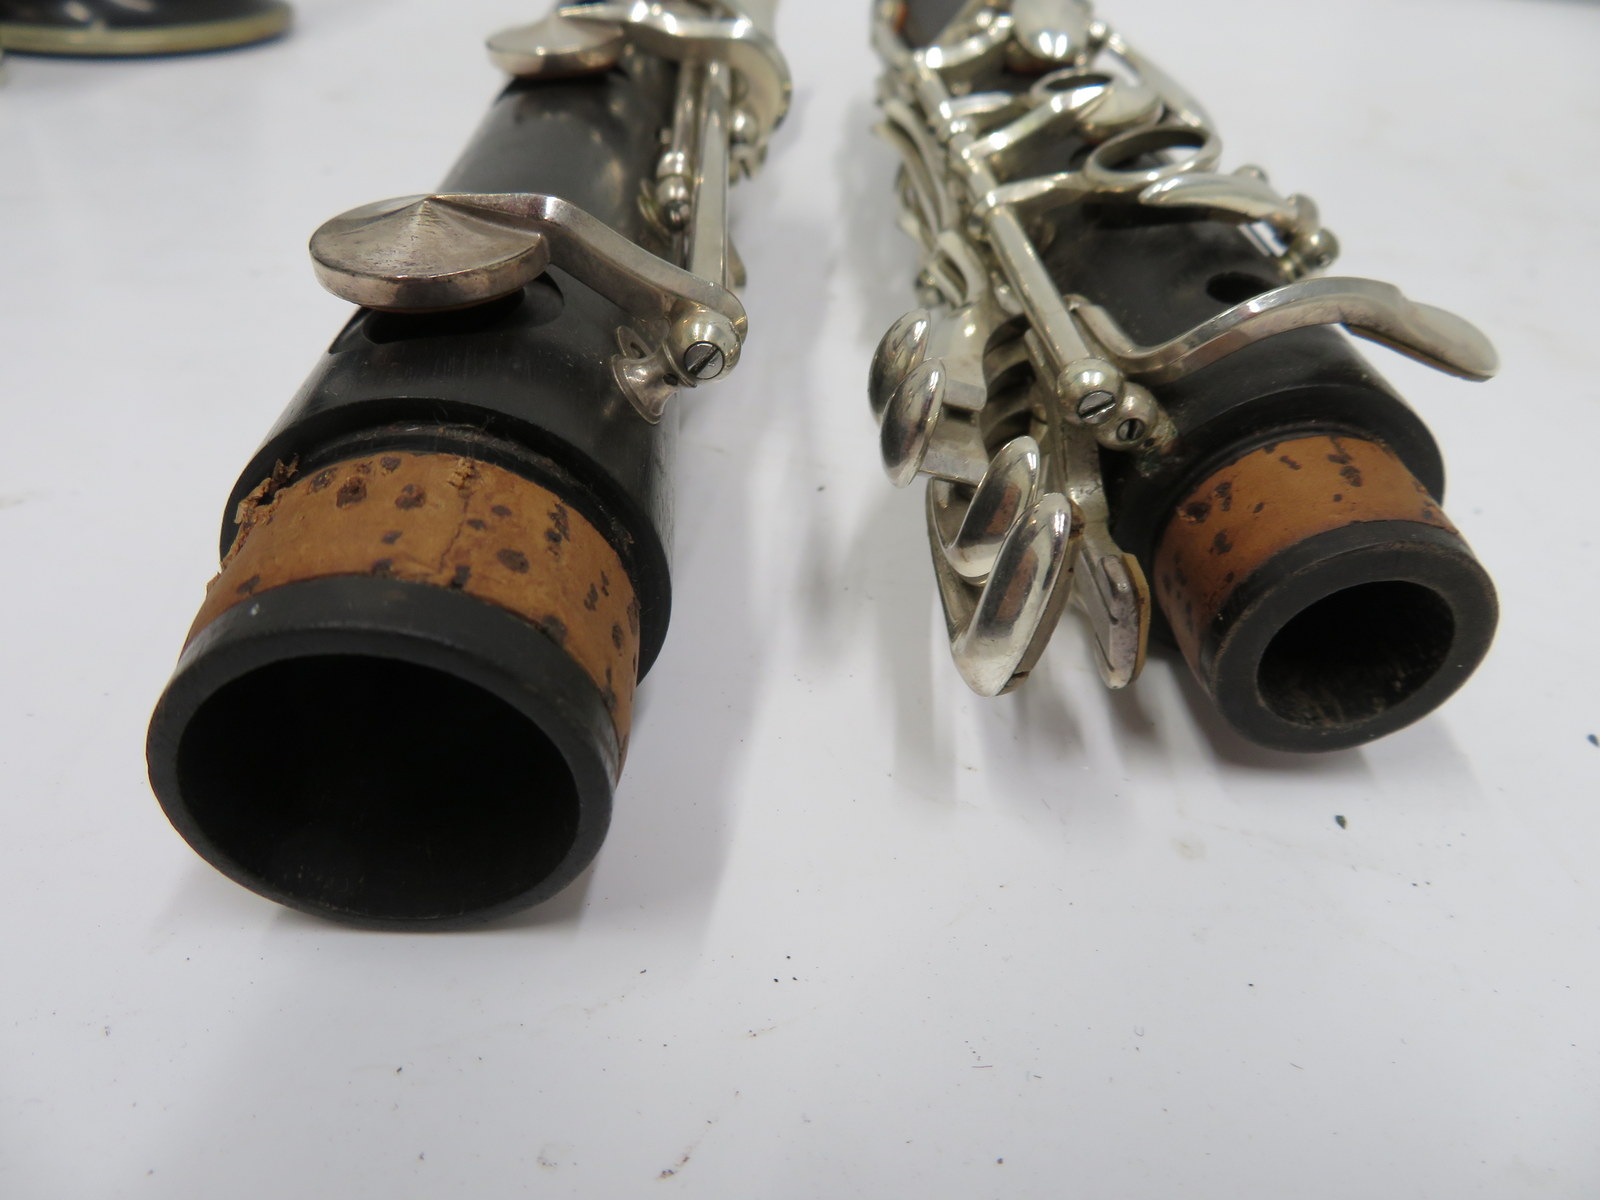 Buffet Crampon R13 clarinet with case. Serial number: 437527. - Image 17 of 21